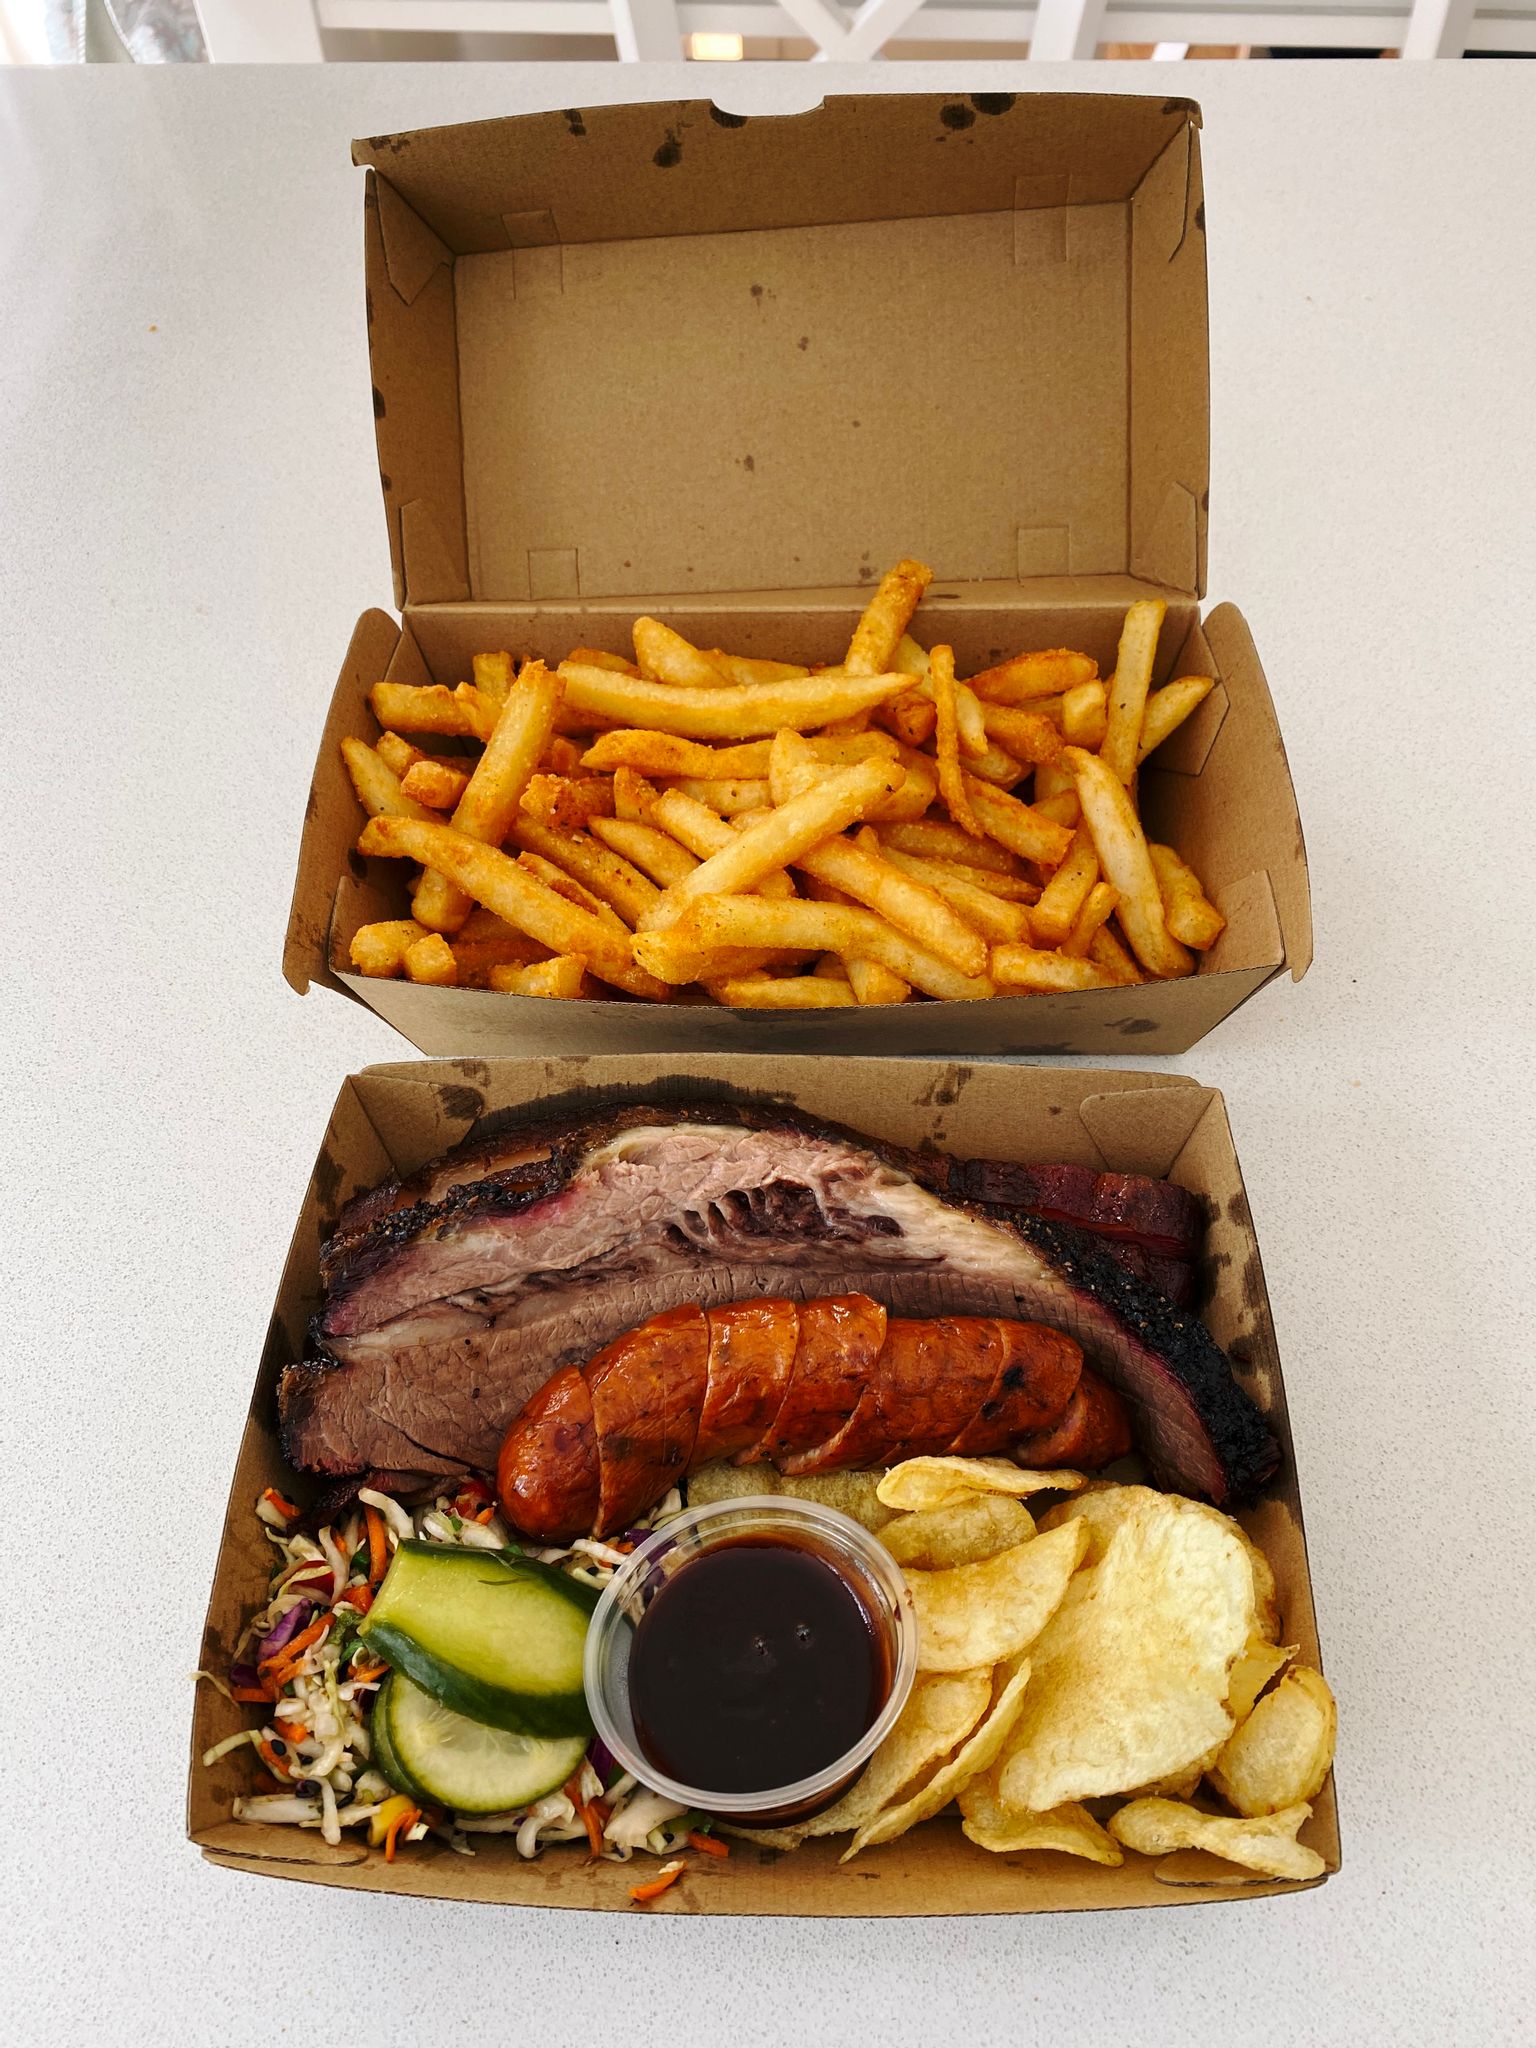 A photo of two takeaway food boxes, one with hot chips, the other with barbecued beef brisket, pork belly, sausage, chips, and slaw.